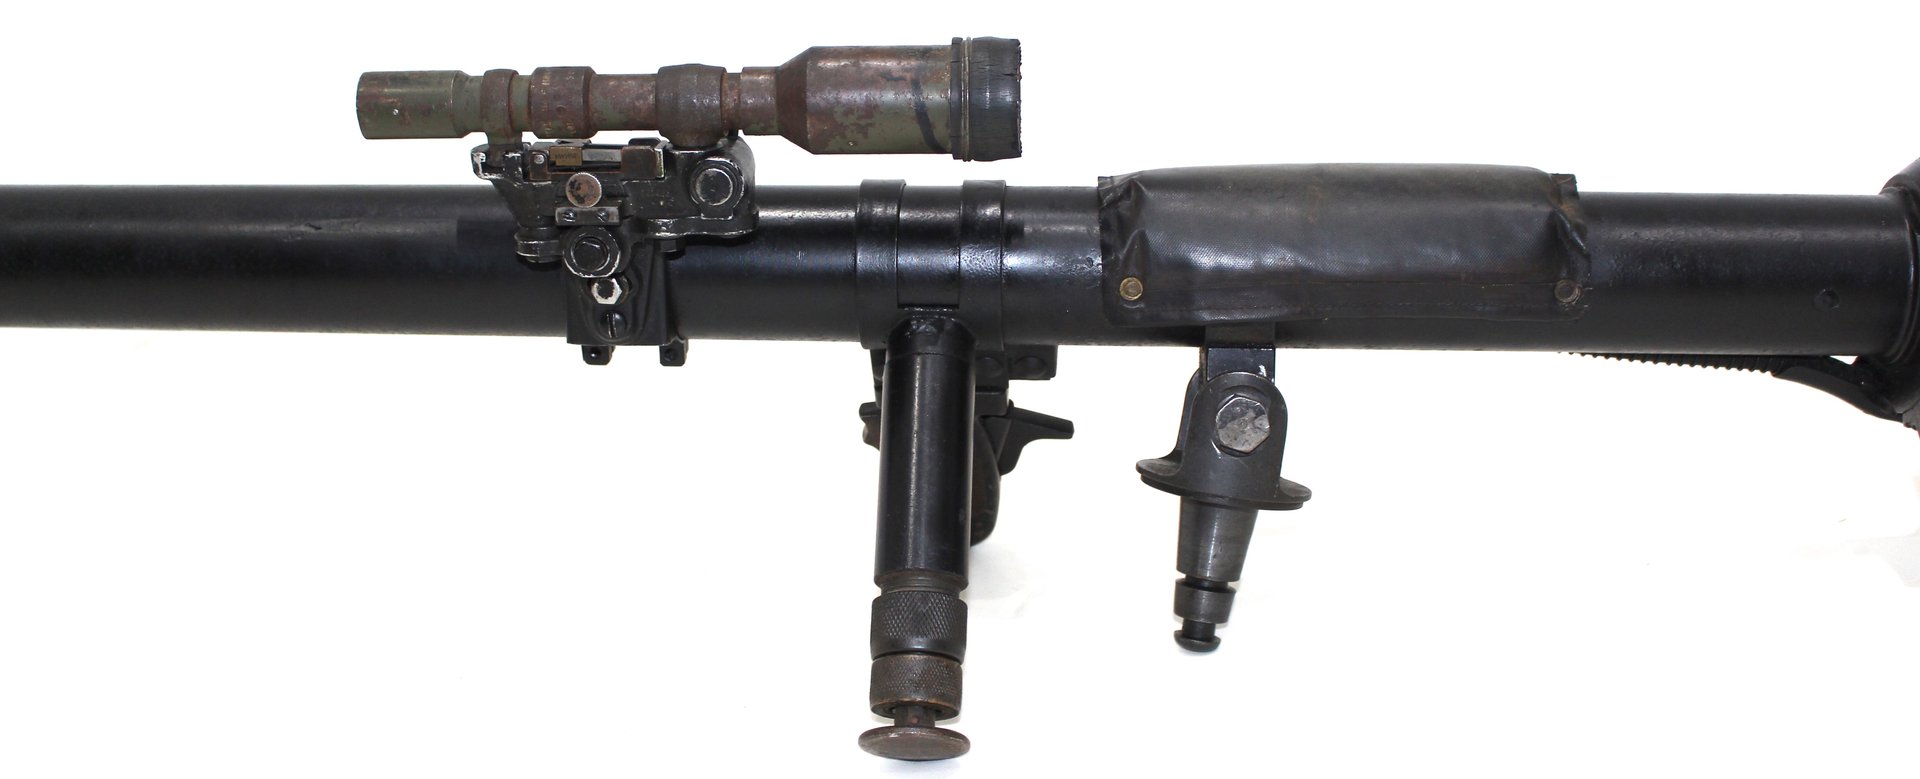 HQ M18 57mm Recoilless Rifle Wallpapers | File 97.11Kb